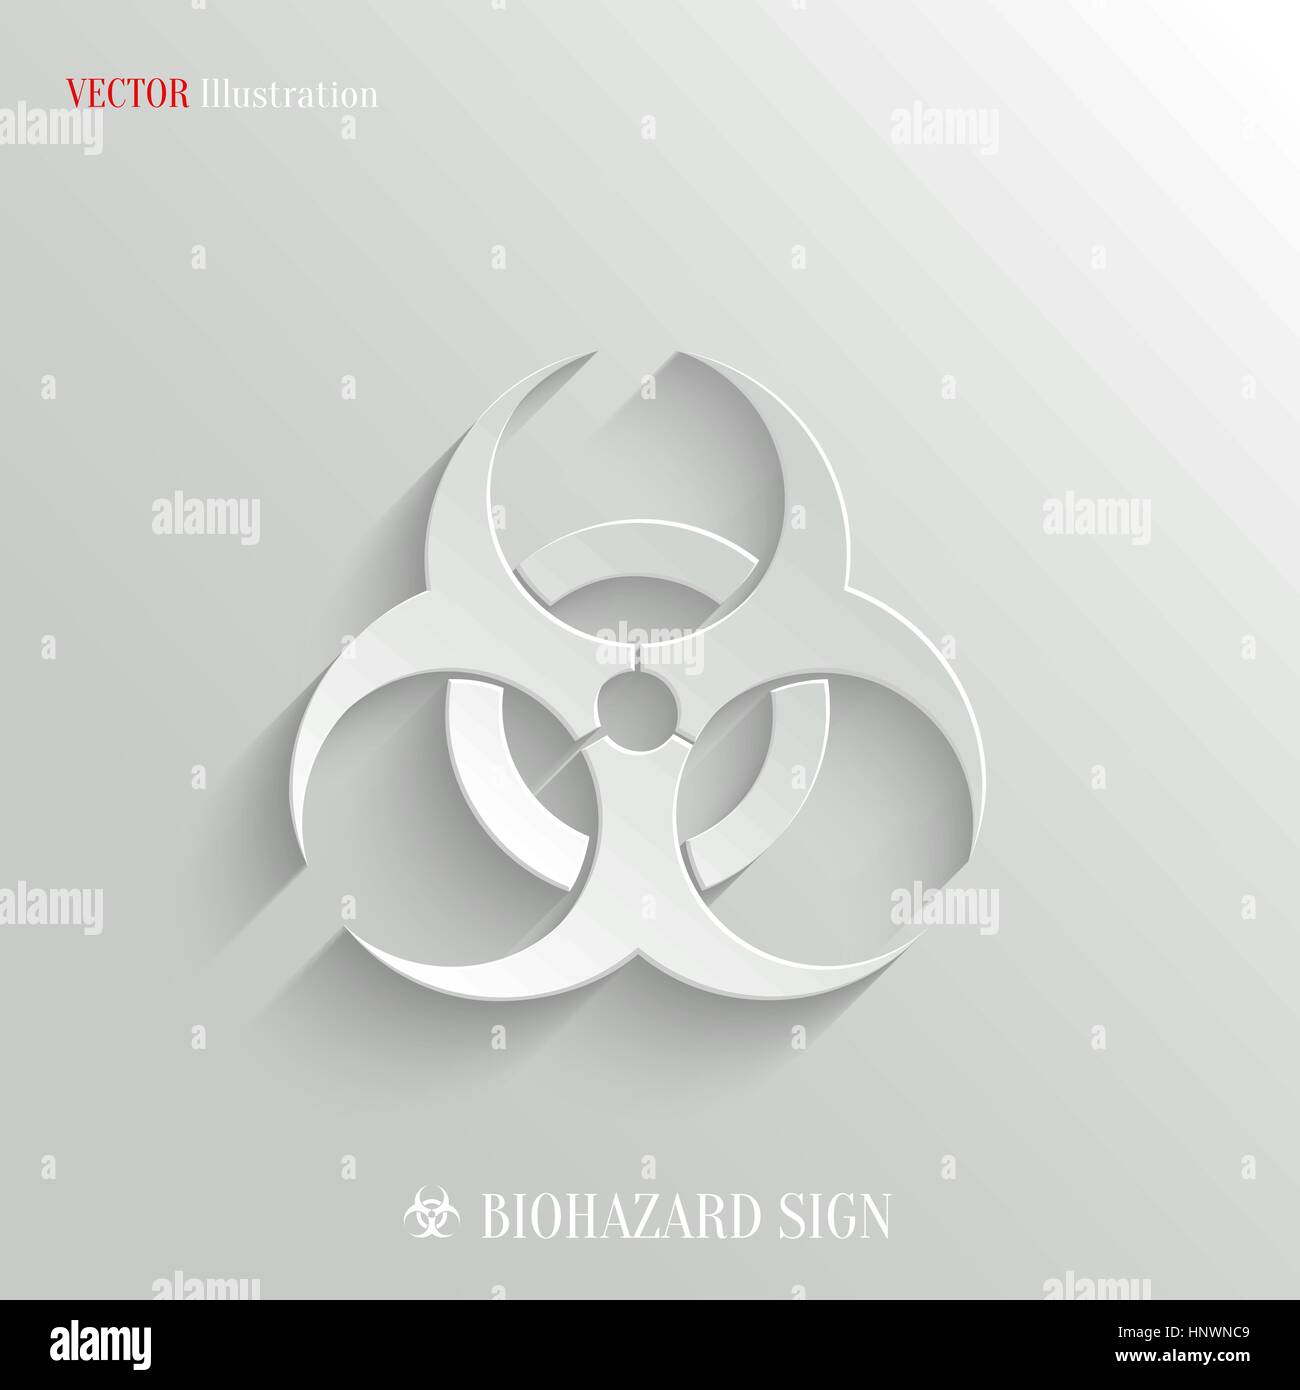 Biohazard icon - vector web illustration, easy paste to any background Stock Vector